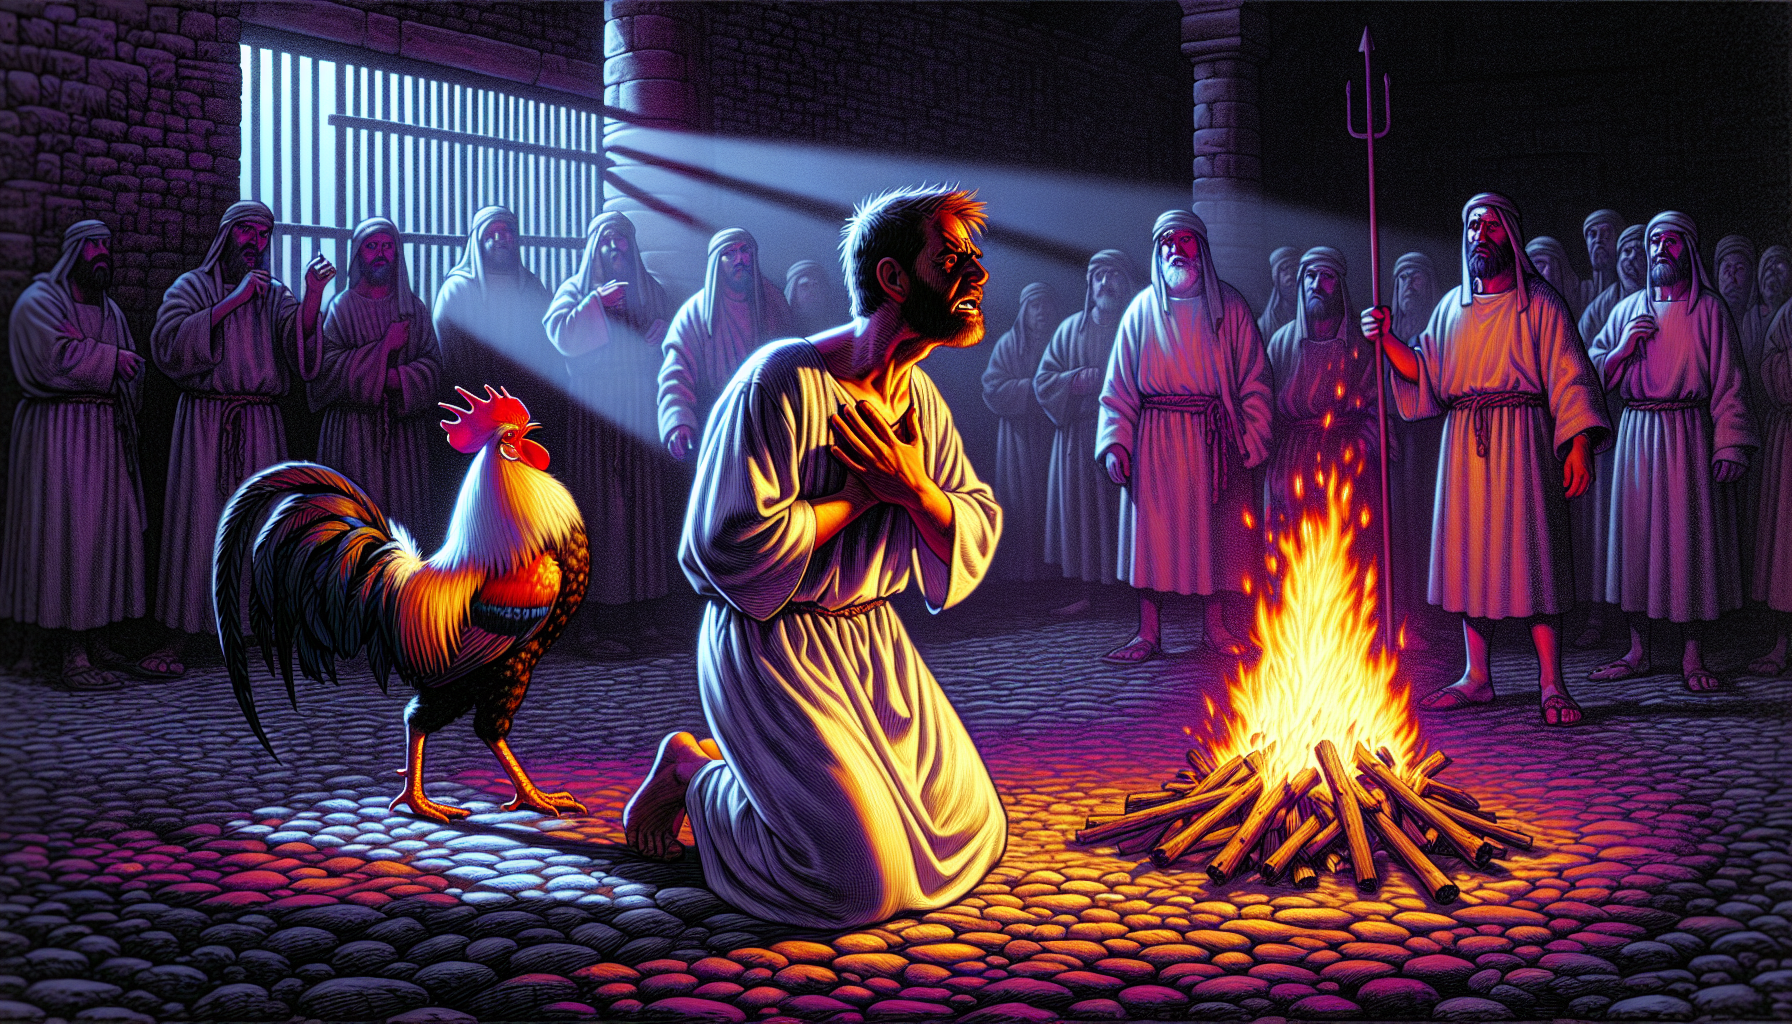 Illustration of Peter denying Jesus in the courtyard, with a rooster crowing in the background. The scene should be set during nighttime, with a distressed Peter standing near a fire, as onlookers and